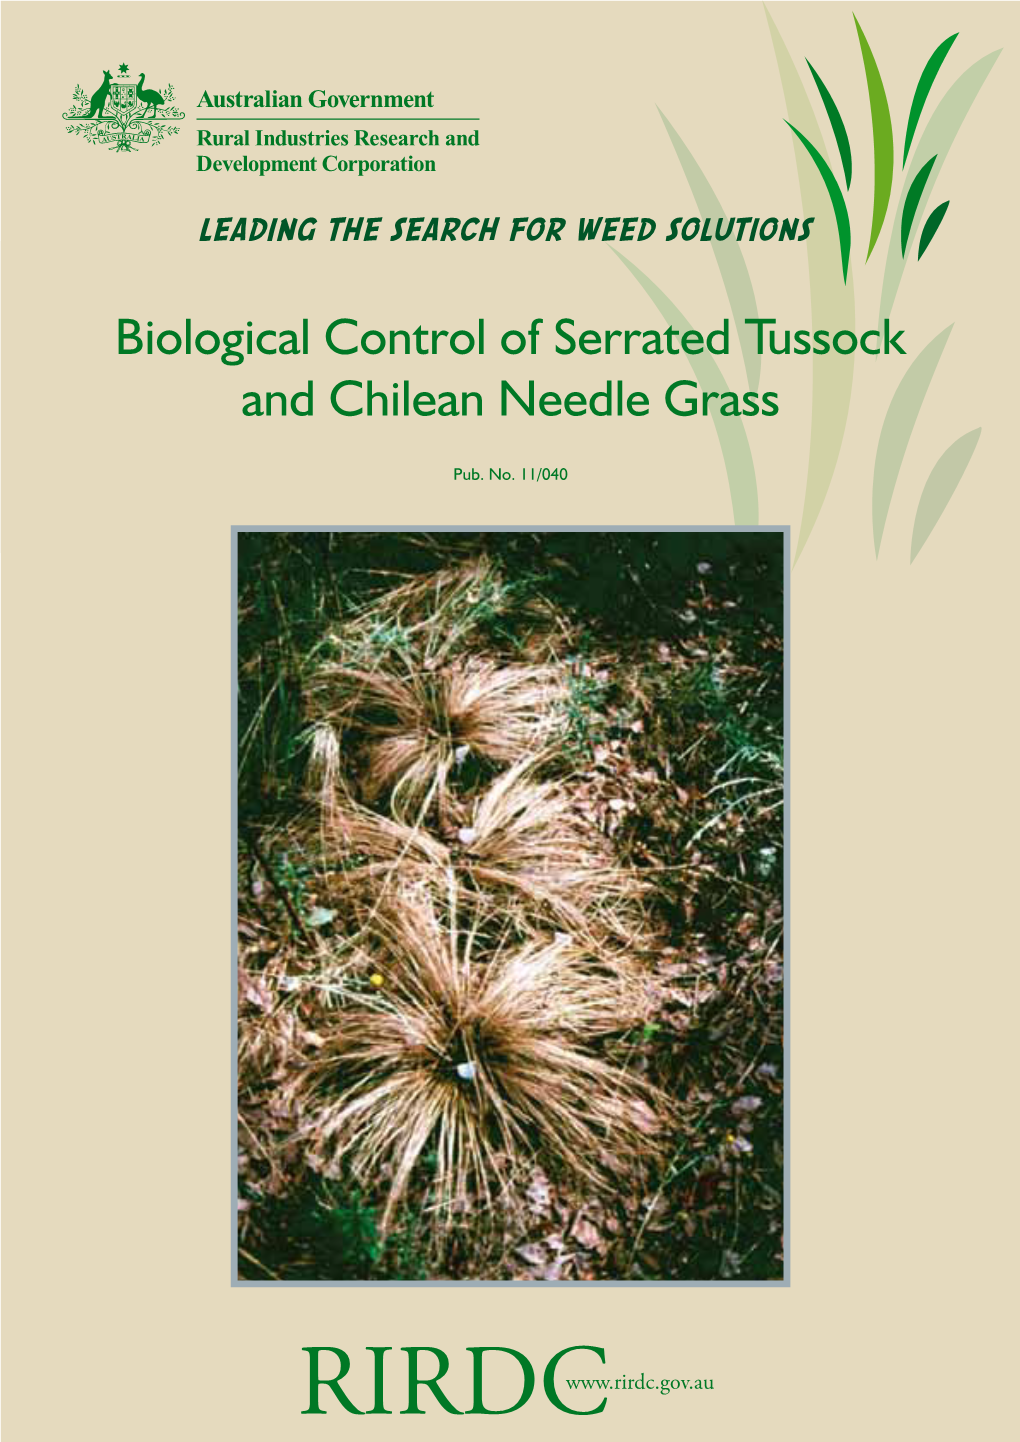 Biological Control of Serrated Tussock and Chilean Needle Grass